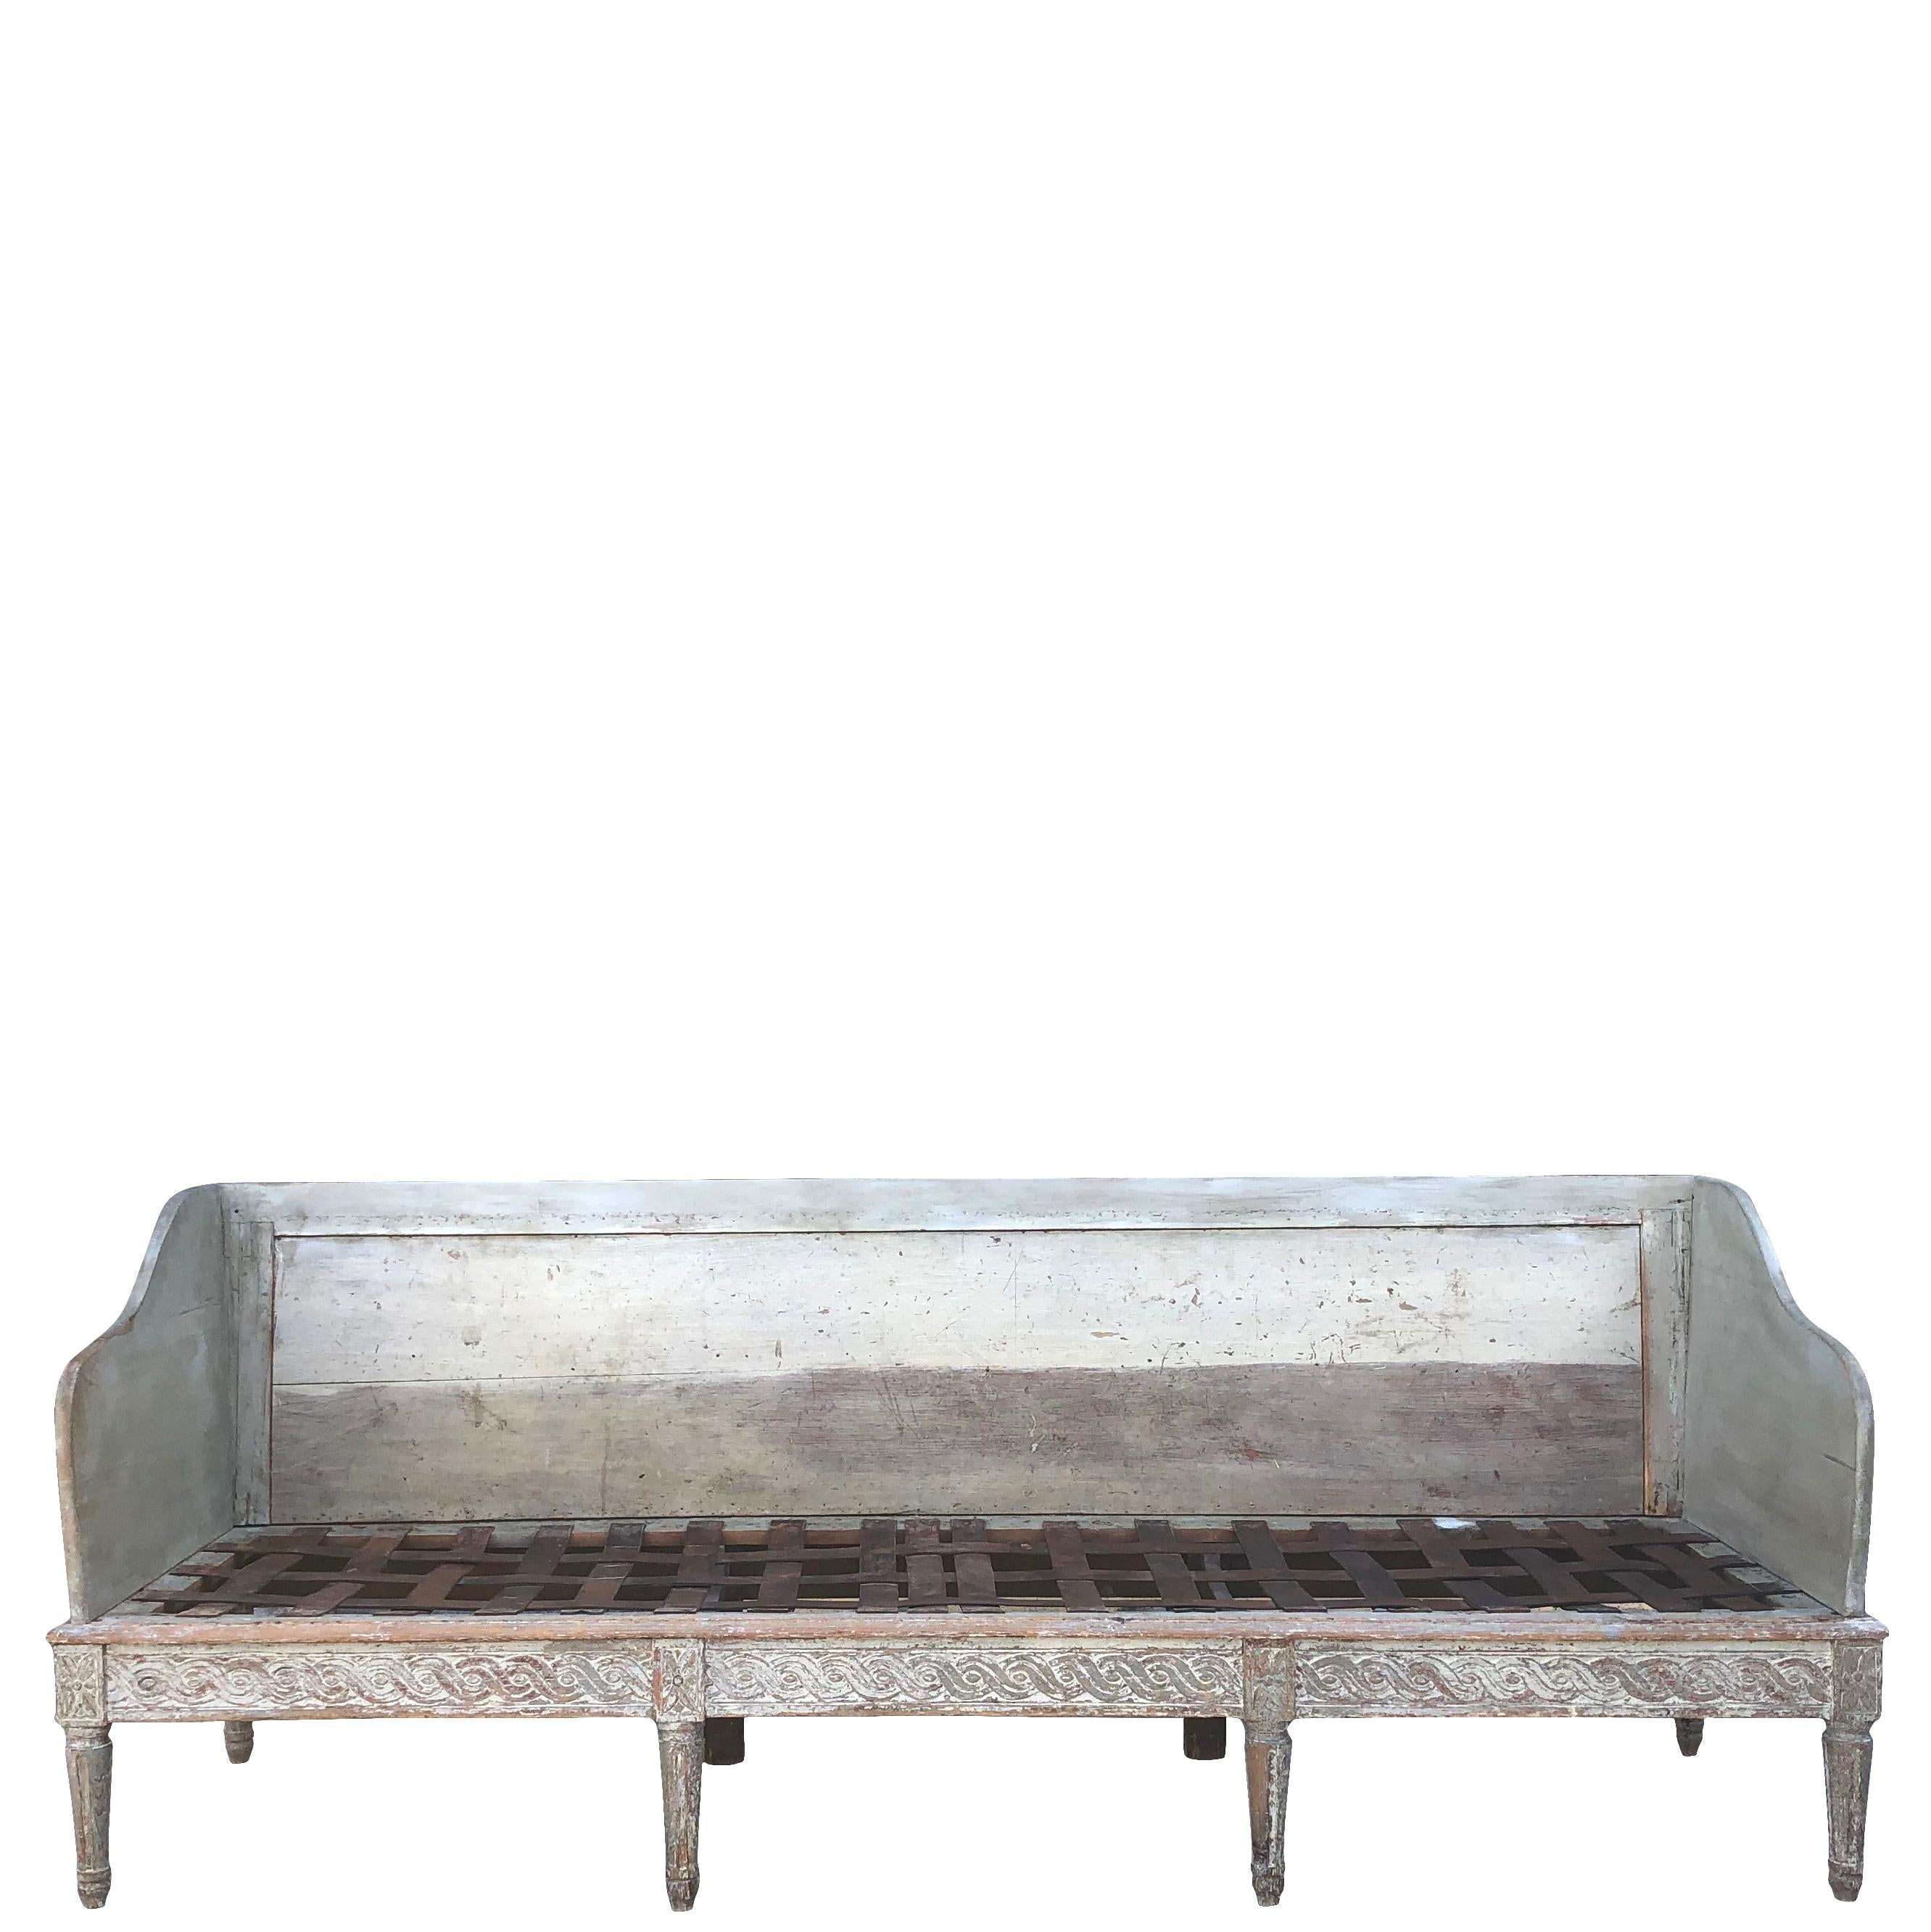 Late 18th century, a large pinewood Gustavian daybed with very detailed carving and original painted patina, upholstered cushions, in good condition. 

Measures: Seat 14